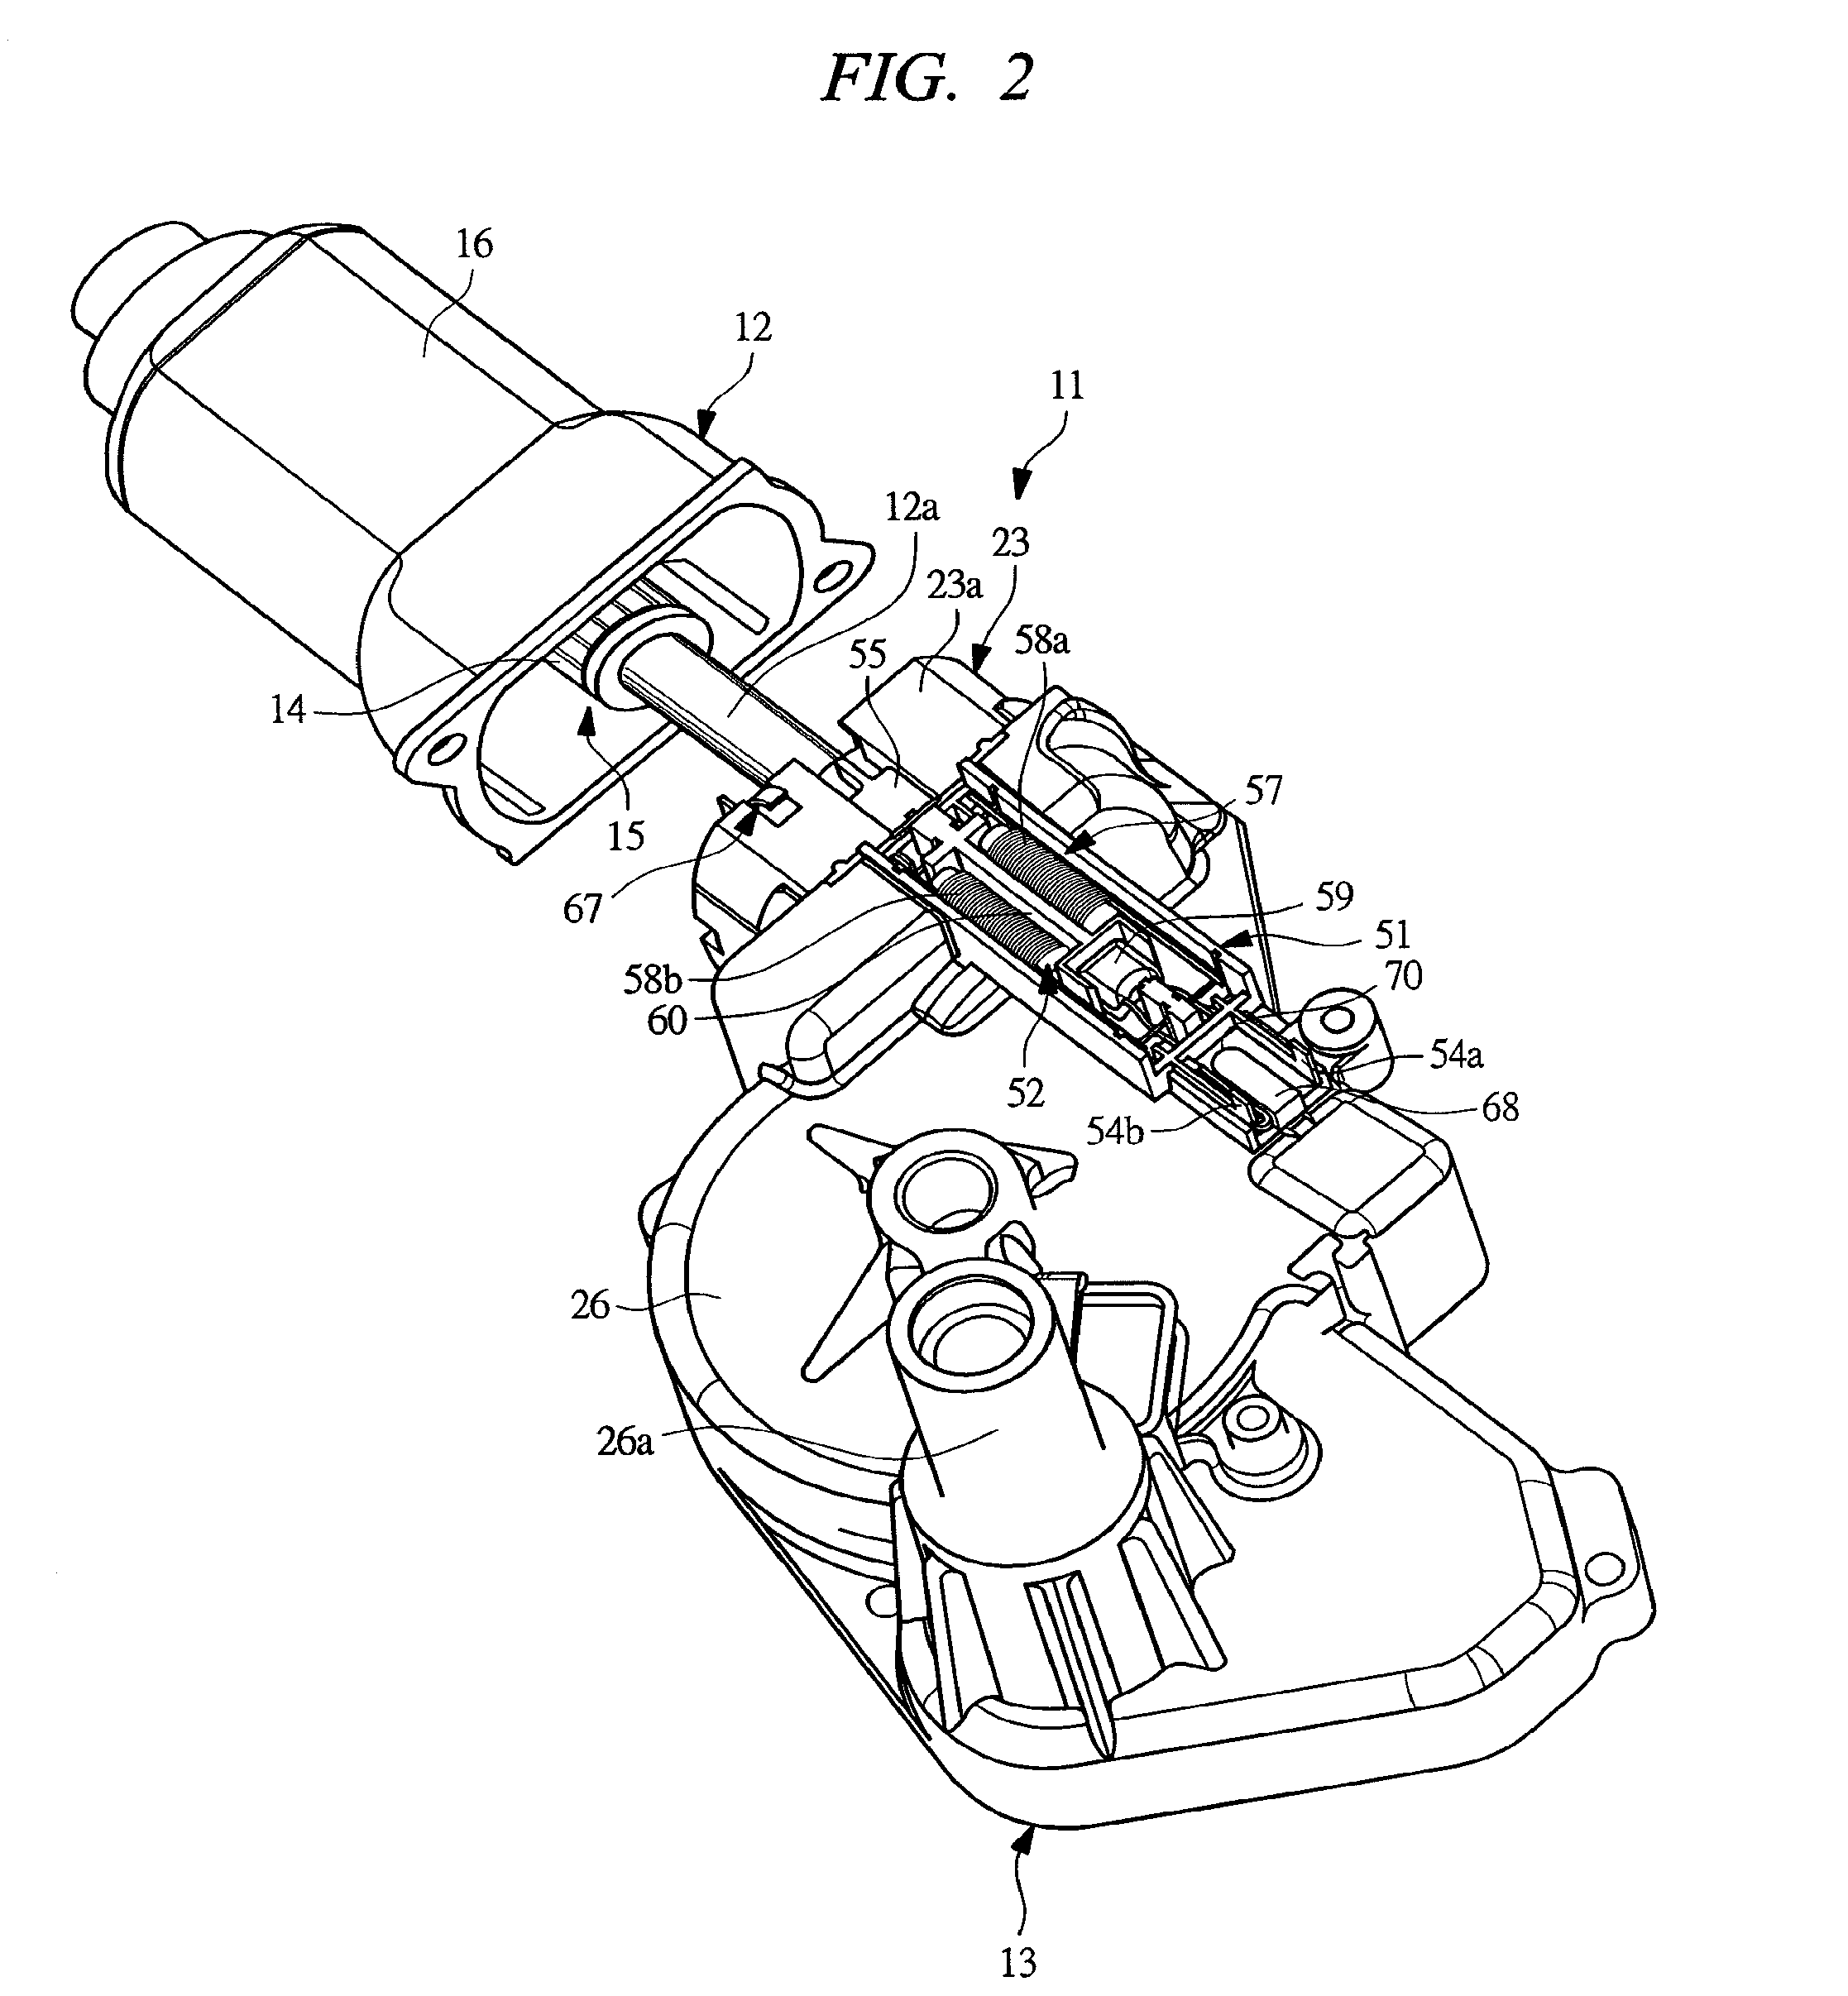 Electric motor with reduction gear mechanism